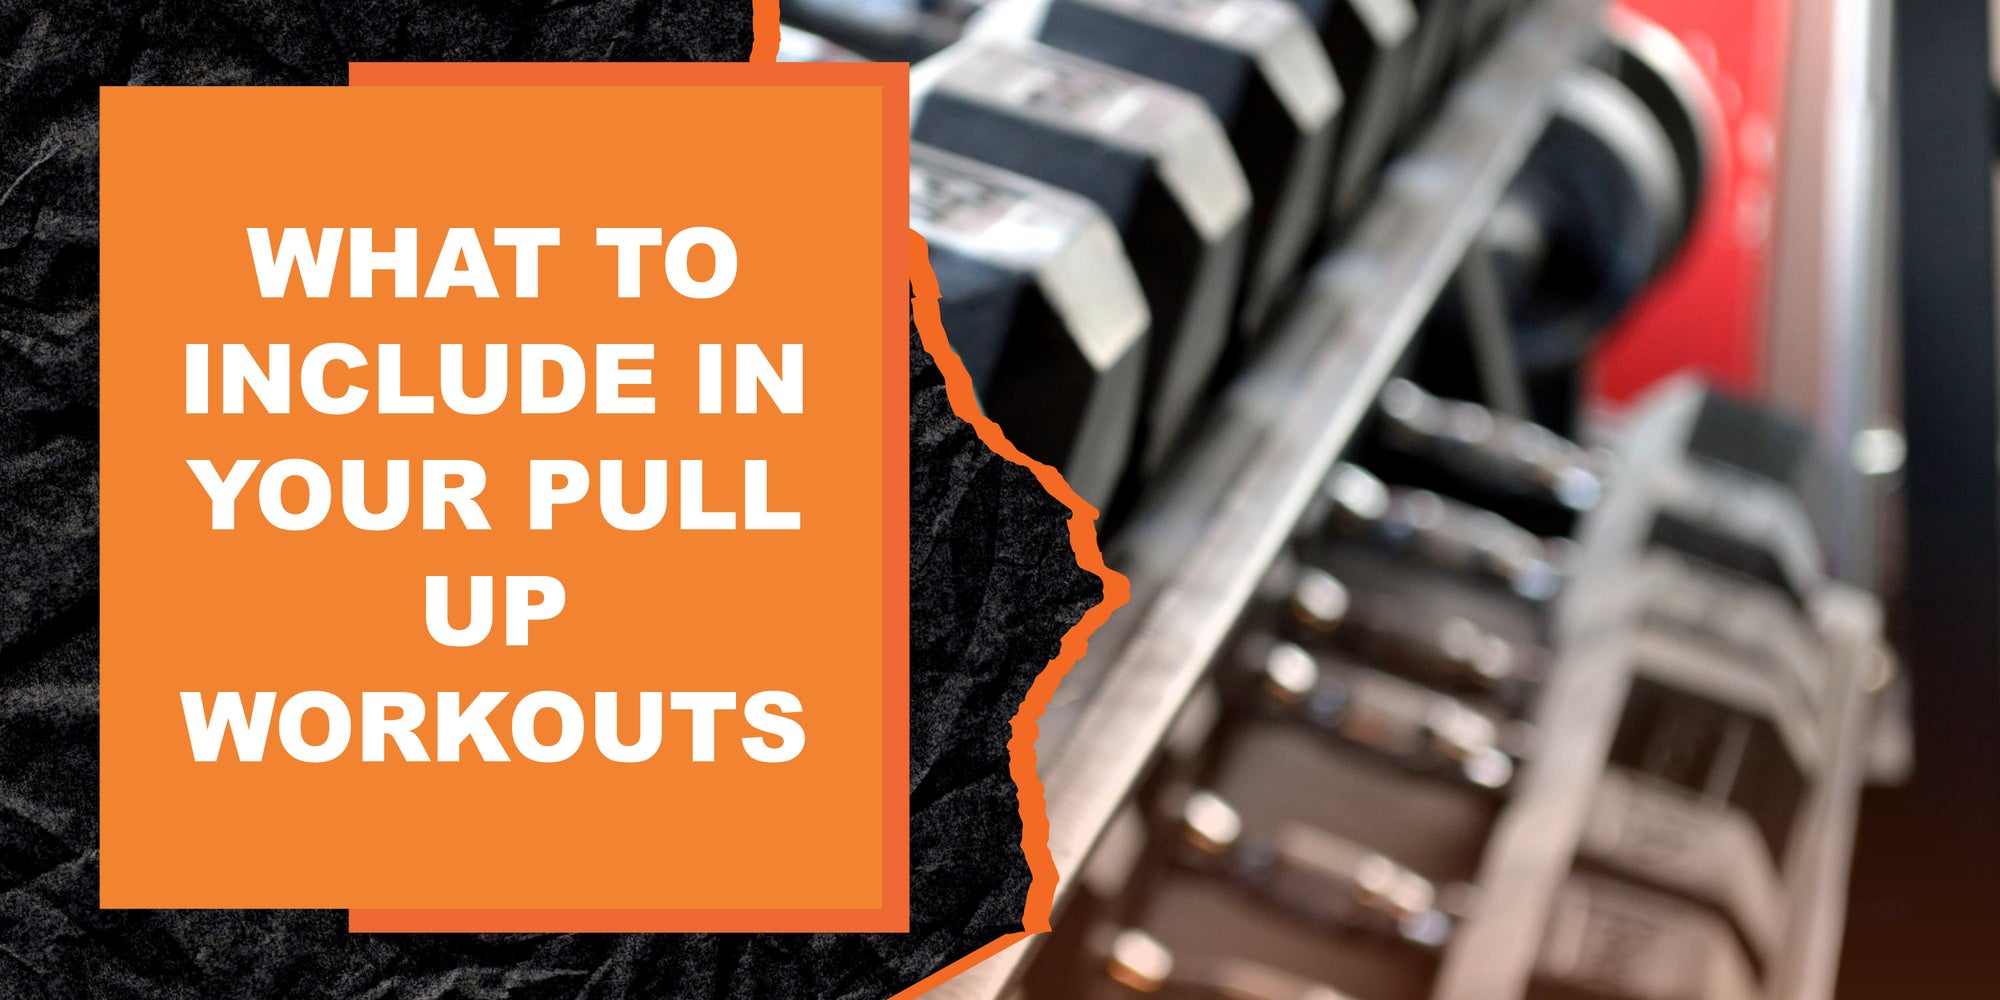 What to Include in Your Pull Up Workouts